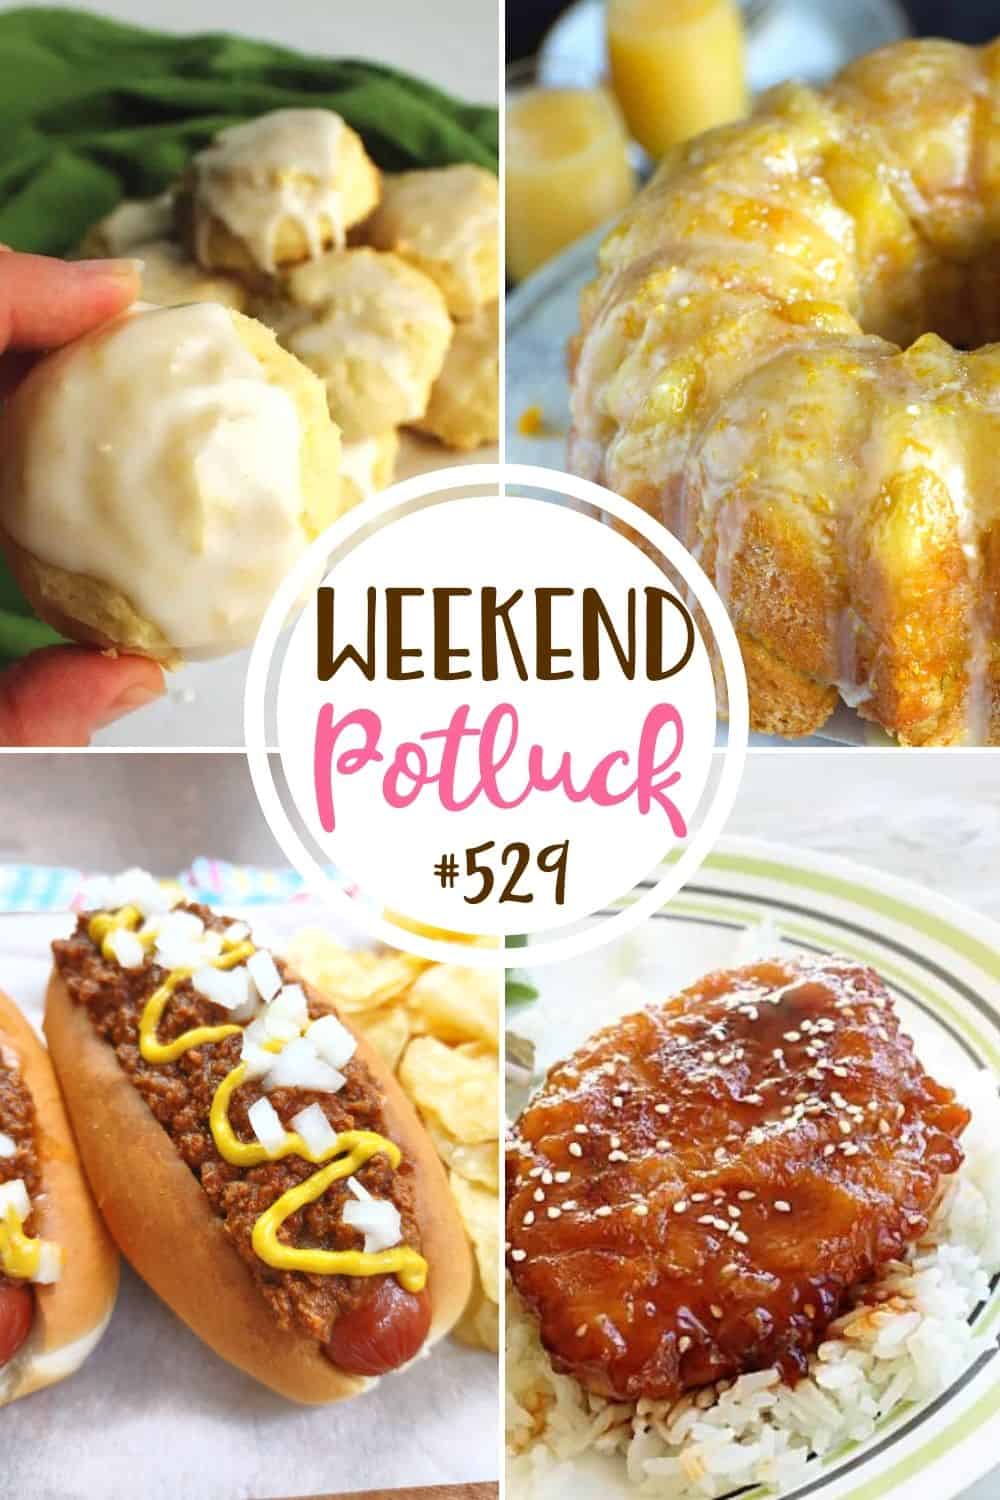 Weekend Potluck featured recipes include: Super Soft Lemon Cookies, Honey Sesame Pork, Mimosa Monkey Bread, and the Best Hot Dog Chili.